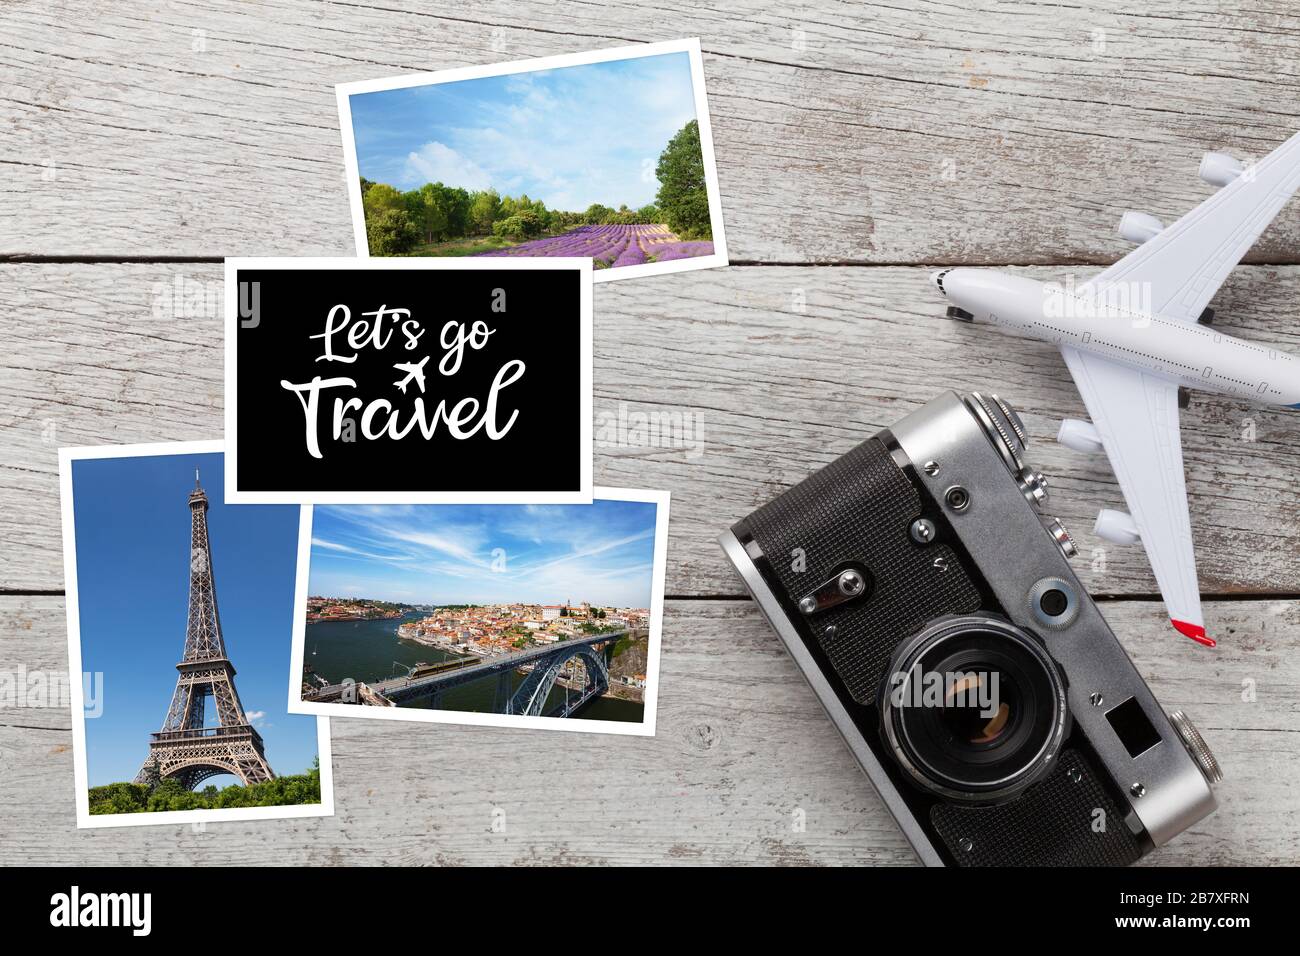 Travel concept with vacation photos, airplane toy and camera on wooden table. Top view flat lay with copy space Stock Photo